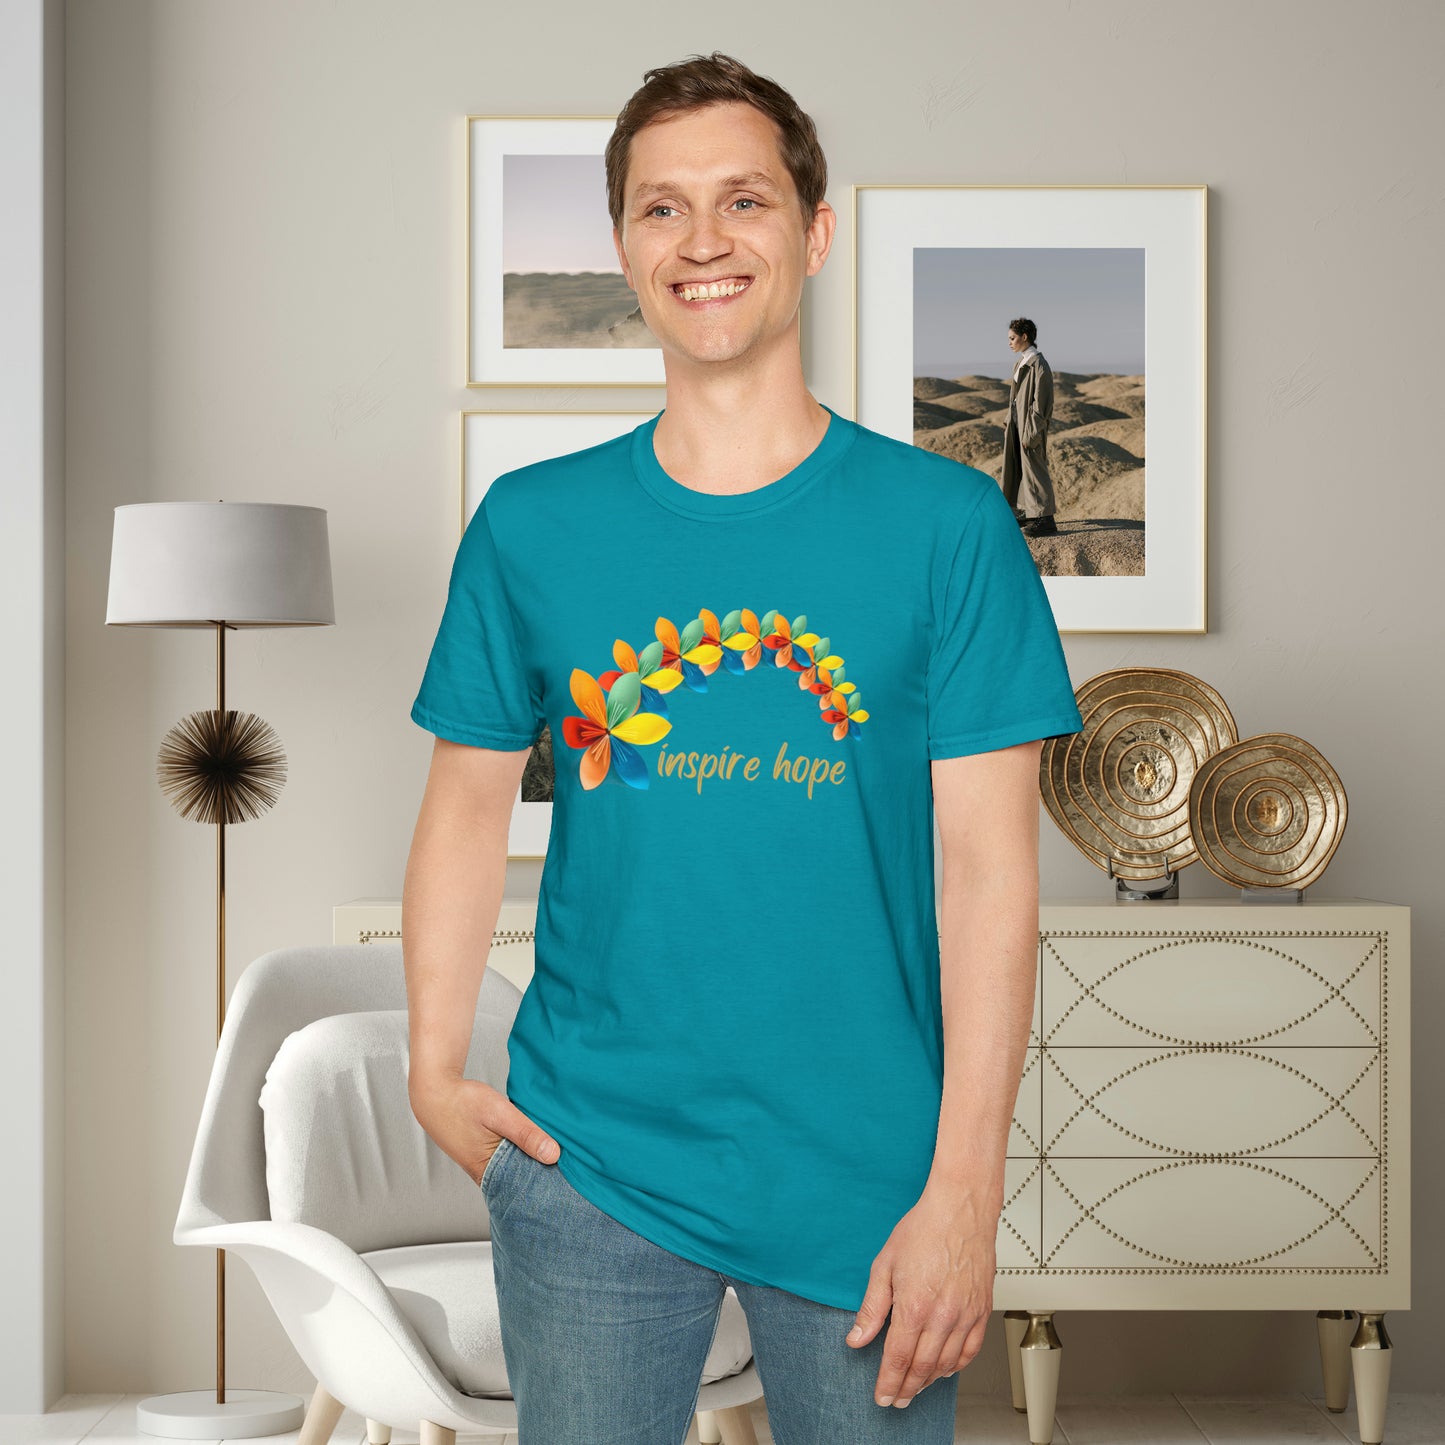 A beautiful origami style flowers in rainbow formation with “inspire hope” below it. We find hope in each other, that is part of our humanity. Be that inspiration, one person at a time. This is a Unisex Softstyle T-Shirt.